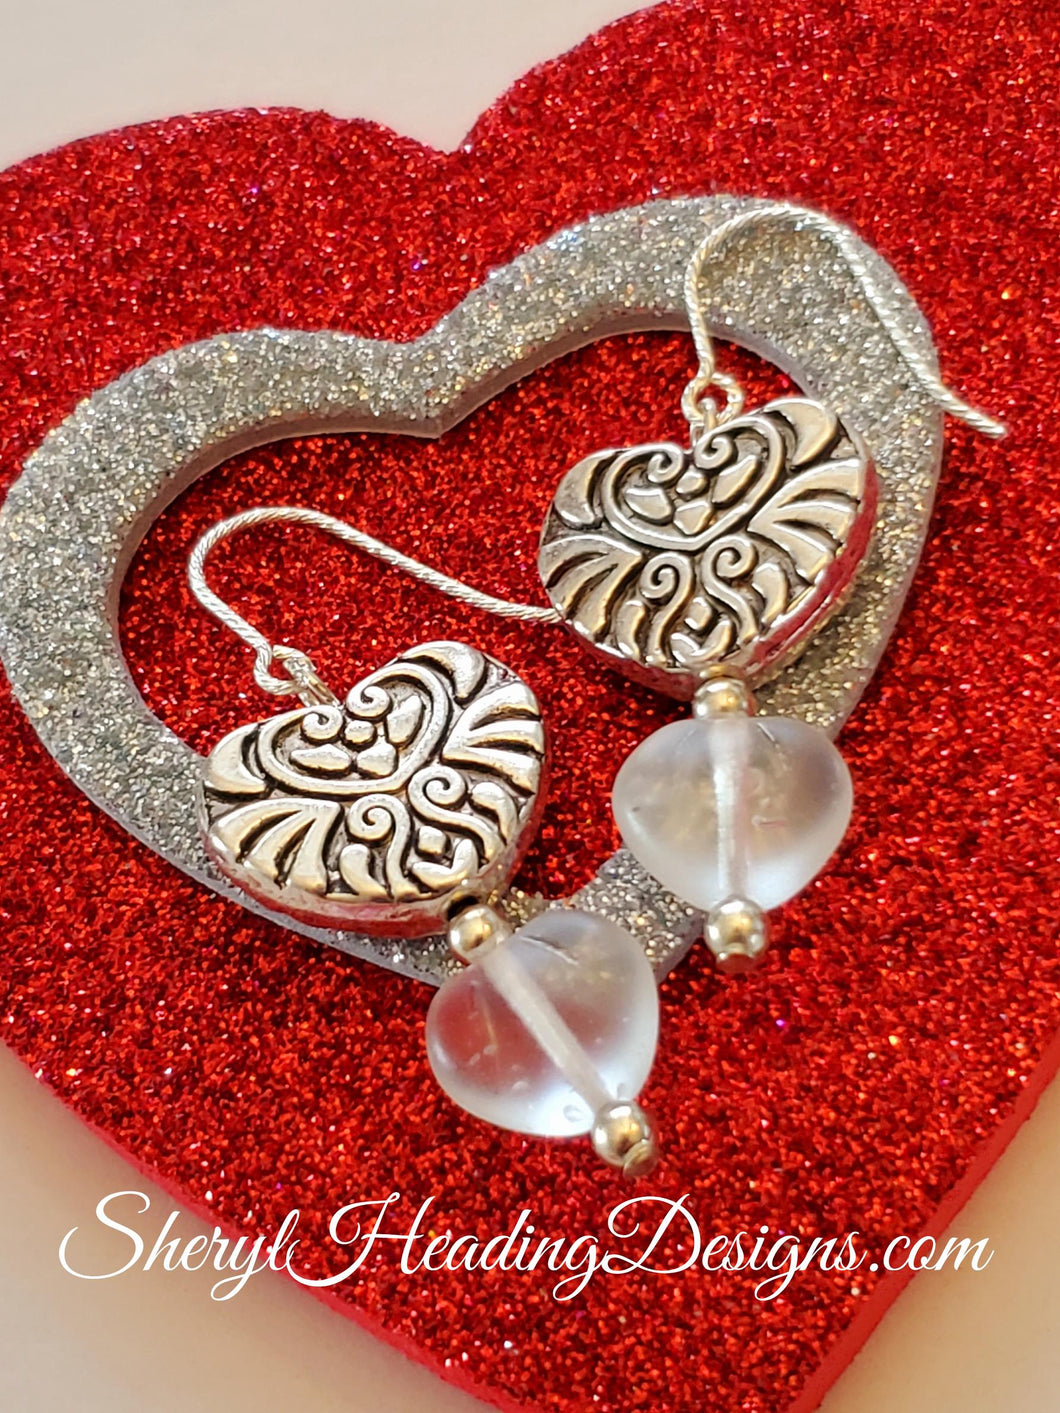 This Hearts for You Earrings - Sheryl Heading Designs